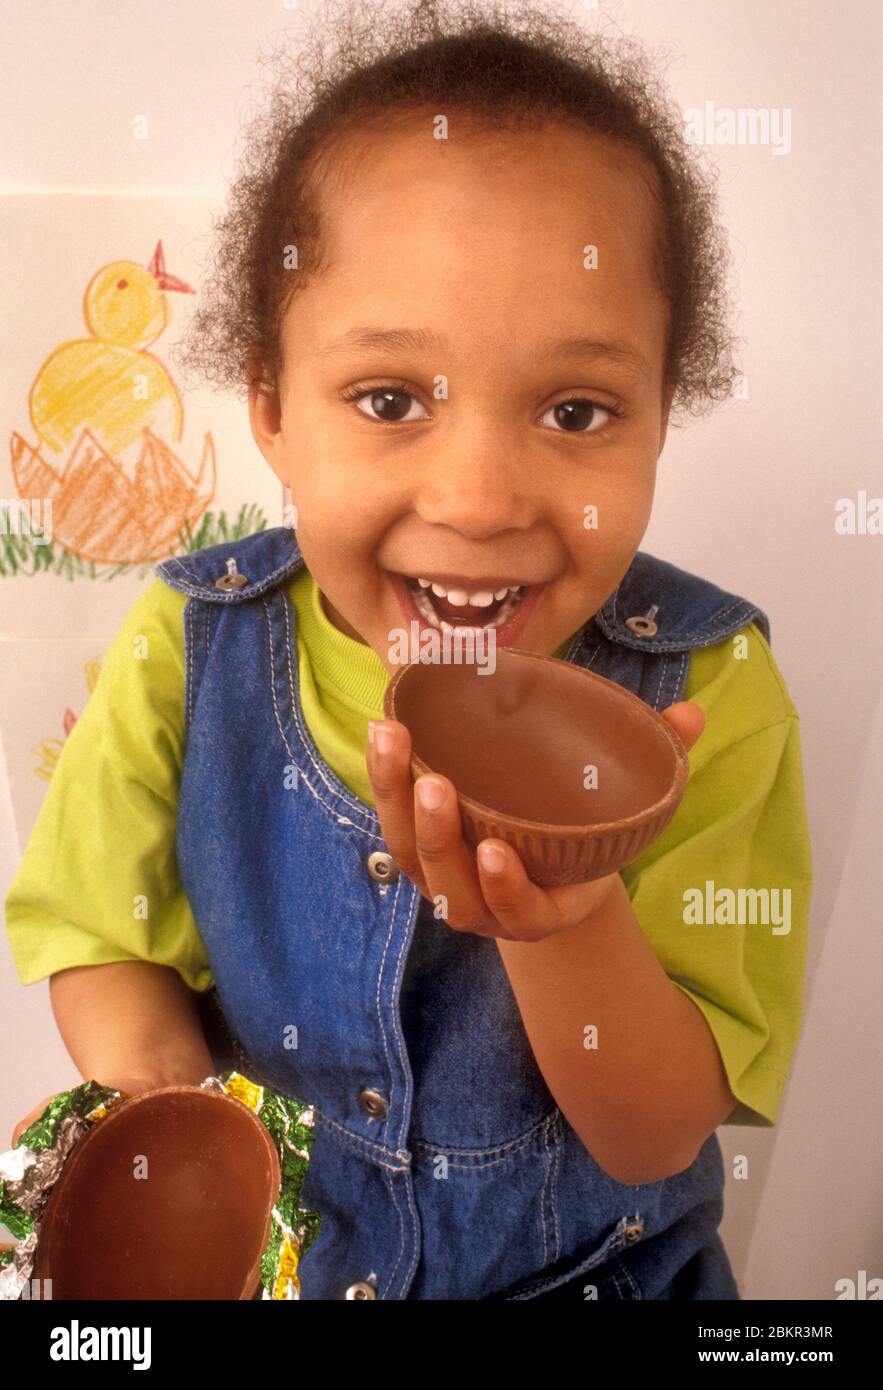 EASTER Infant African American Carribbean 4 years old girl biting into a chocolate Easter egg shell, with her Easter chick drawing on her wall behind Stock Photo